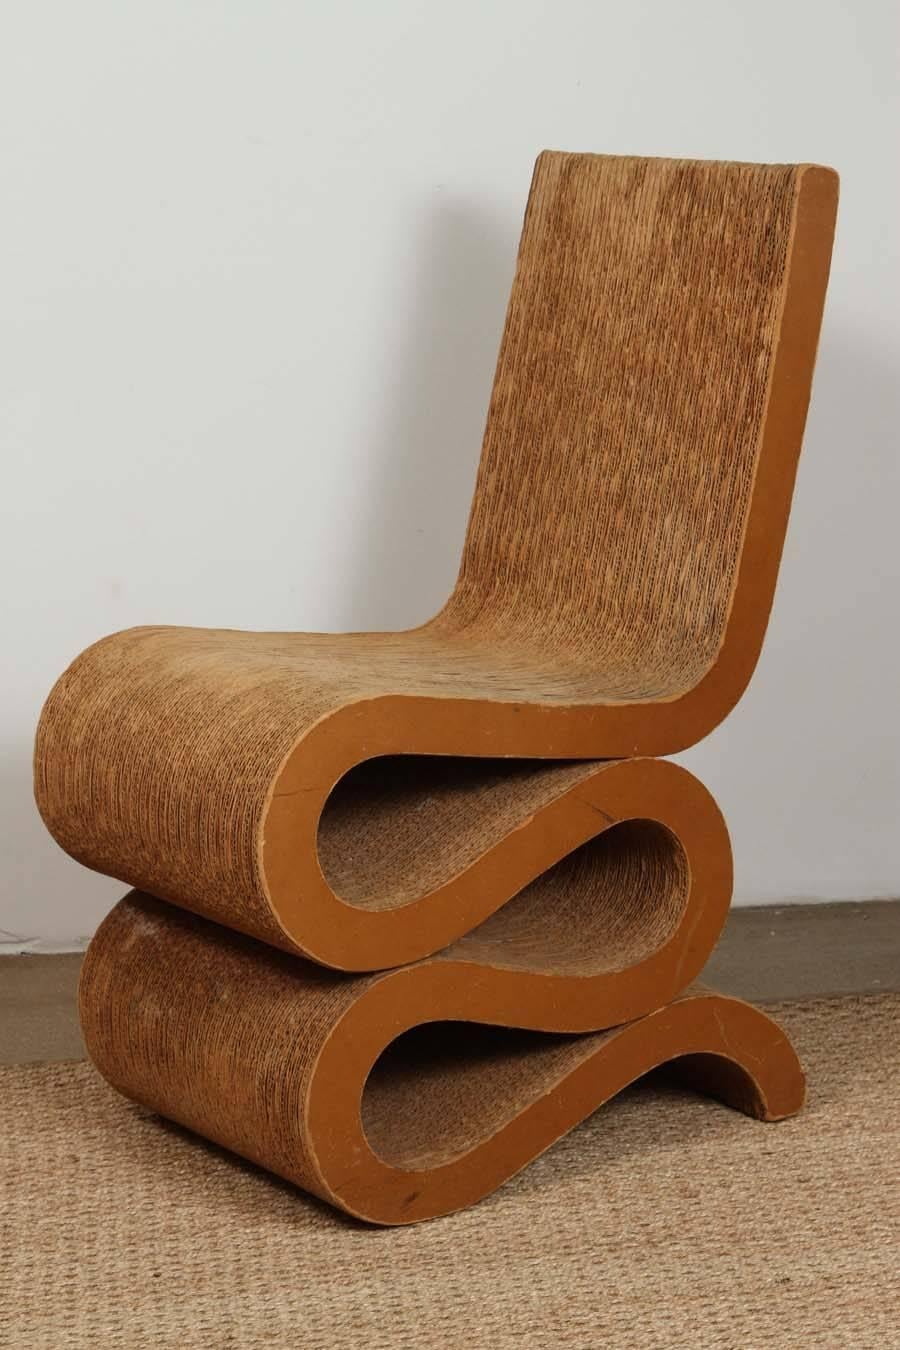 The Wiggle side chair, architect Frank O. Gehry's best-known design in cardboard, was designed in 1972. This example was produced by Easy Edges, Inc for Bloomingdale's. The cardboard seat and back have beautiful suede like patina. The condition is